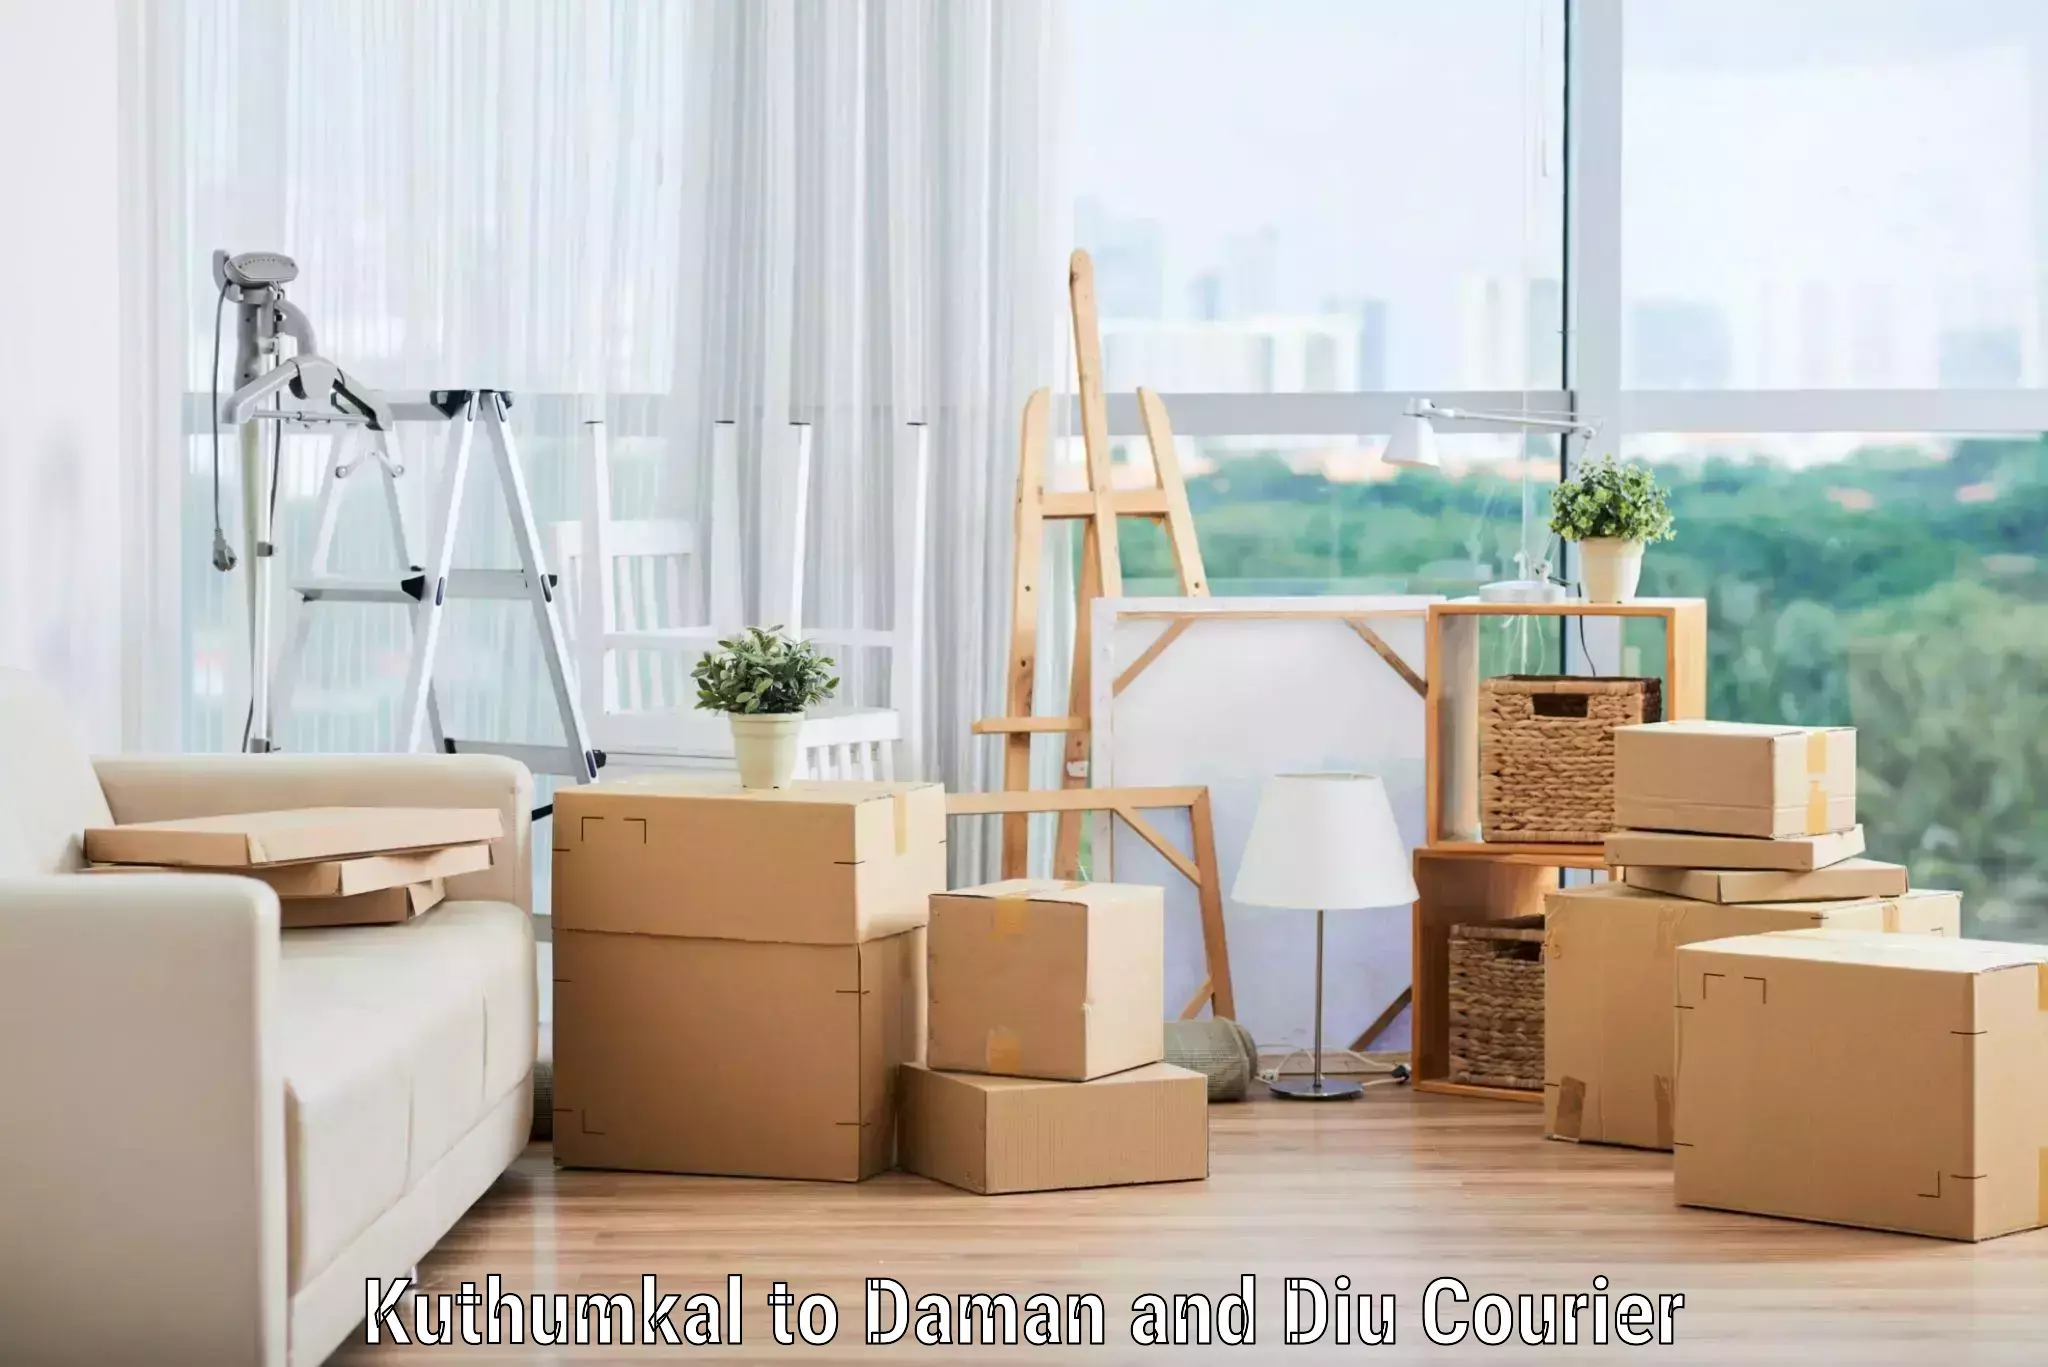 Furniture delivery service Kuthumkal to Diu